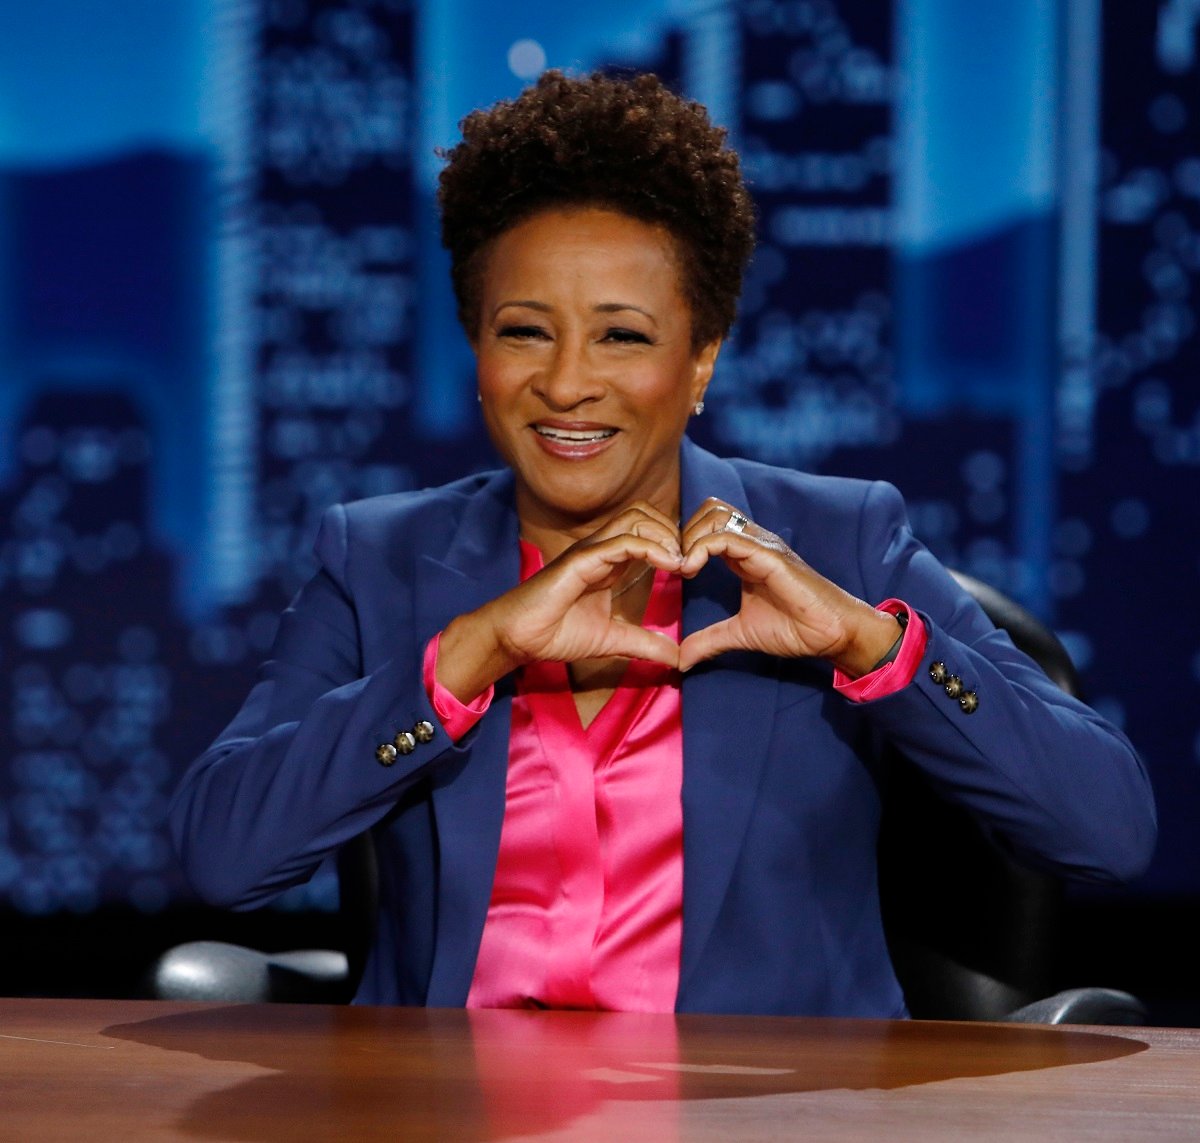 Wanda Sykes making a heart sign while guest hosting 'Jimmy Kimmel Live!'